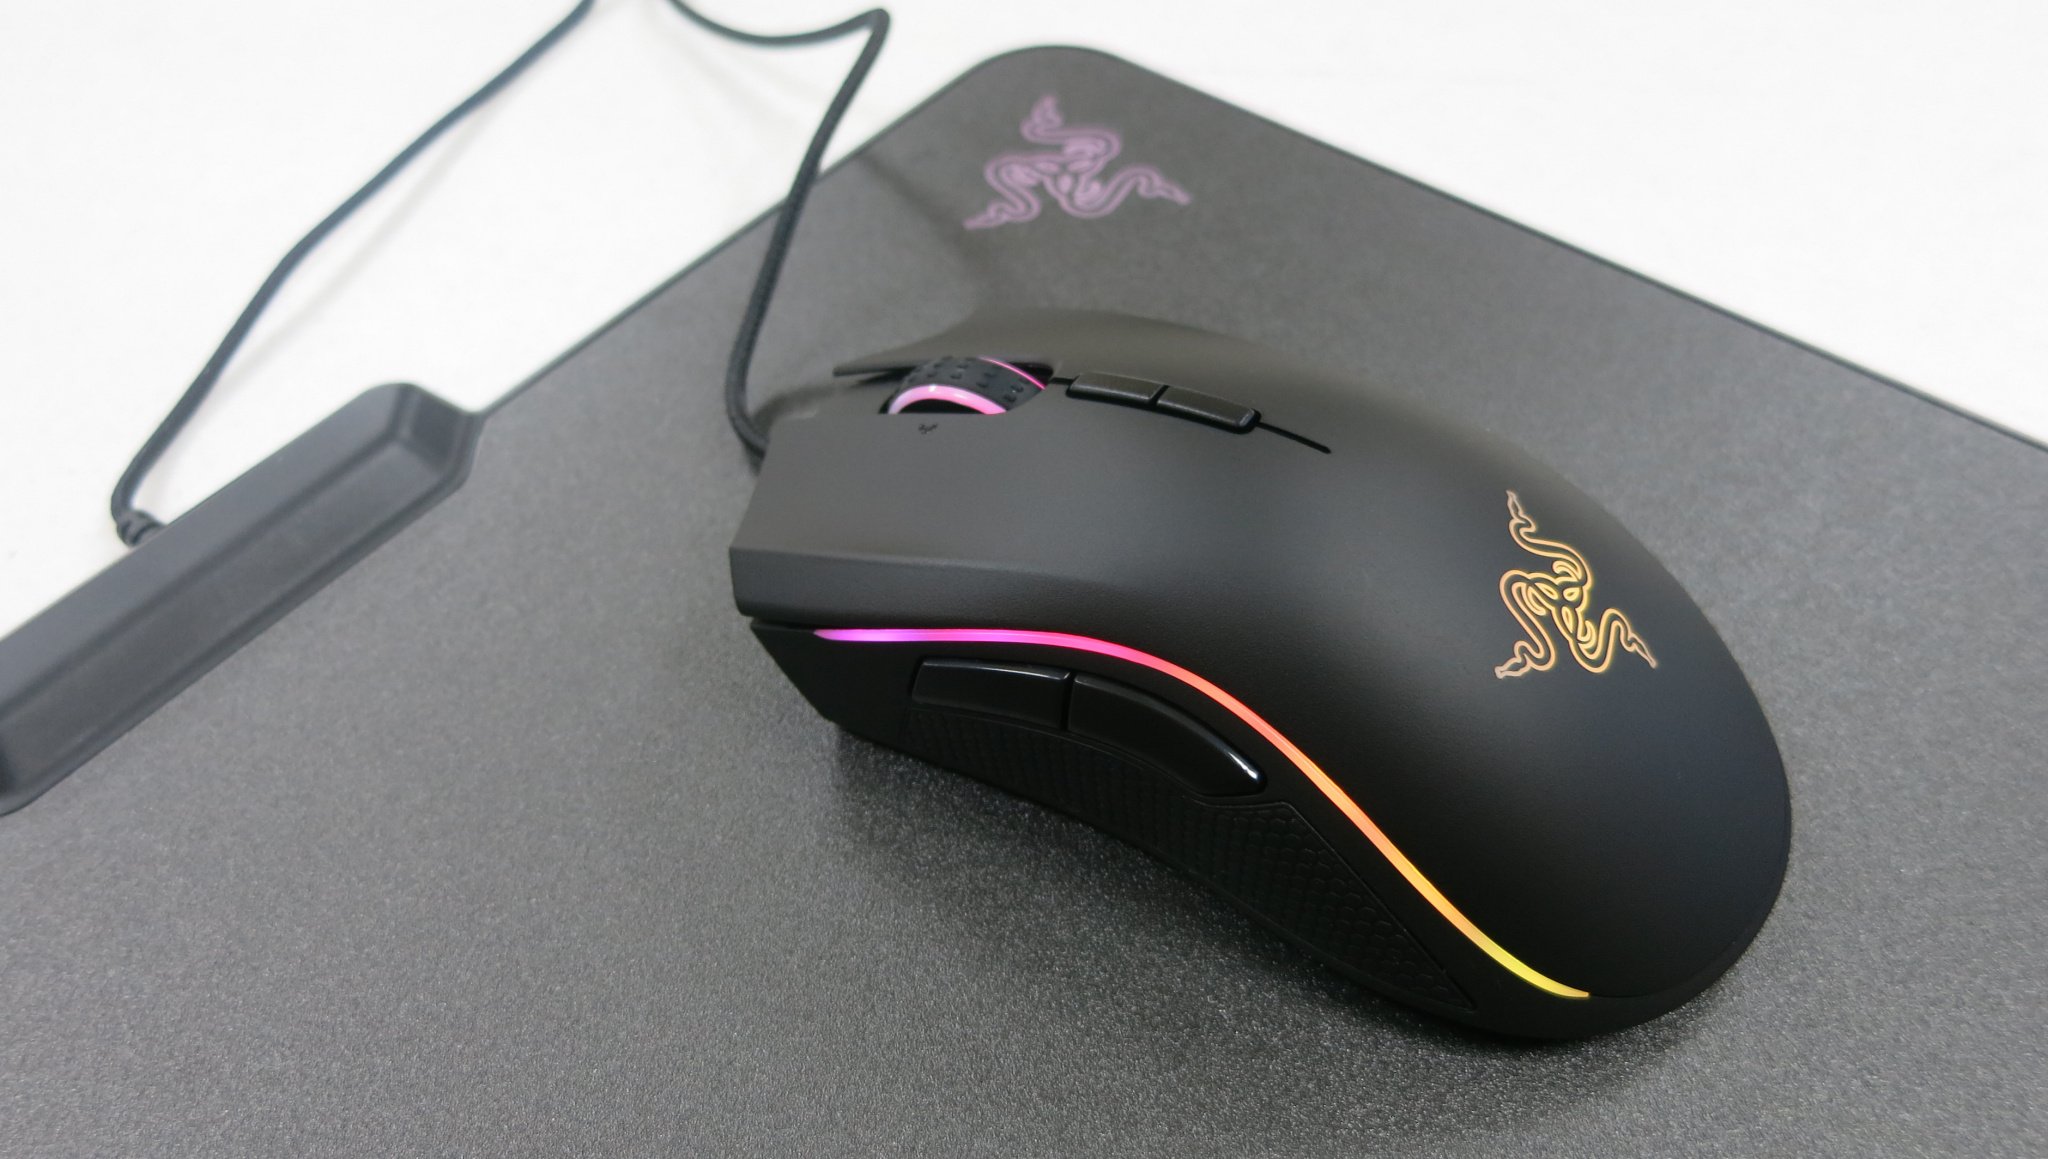 Razer Mamba Tournament Edition light-up gaming mouse review